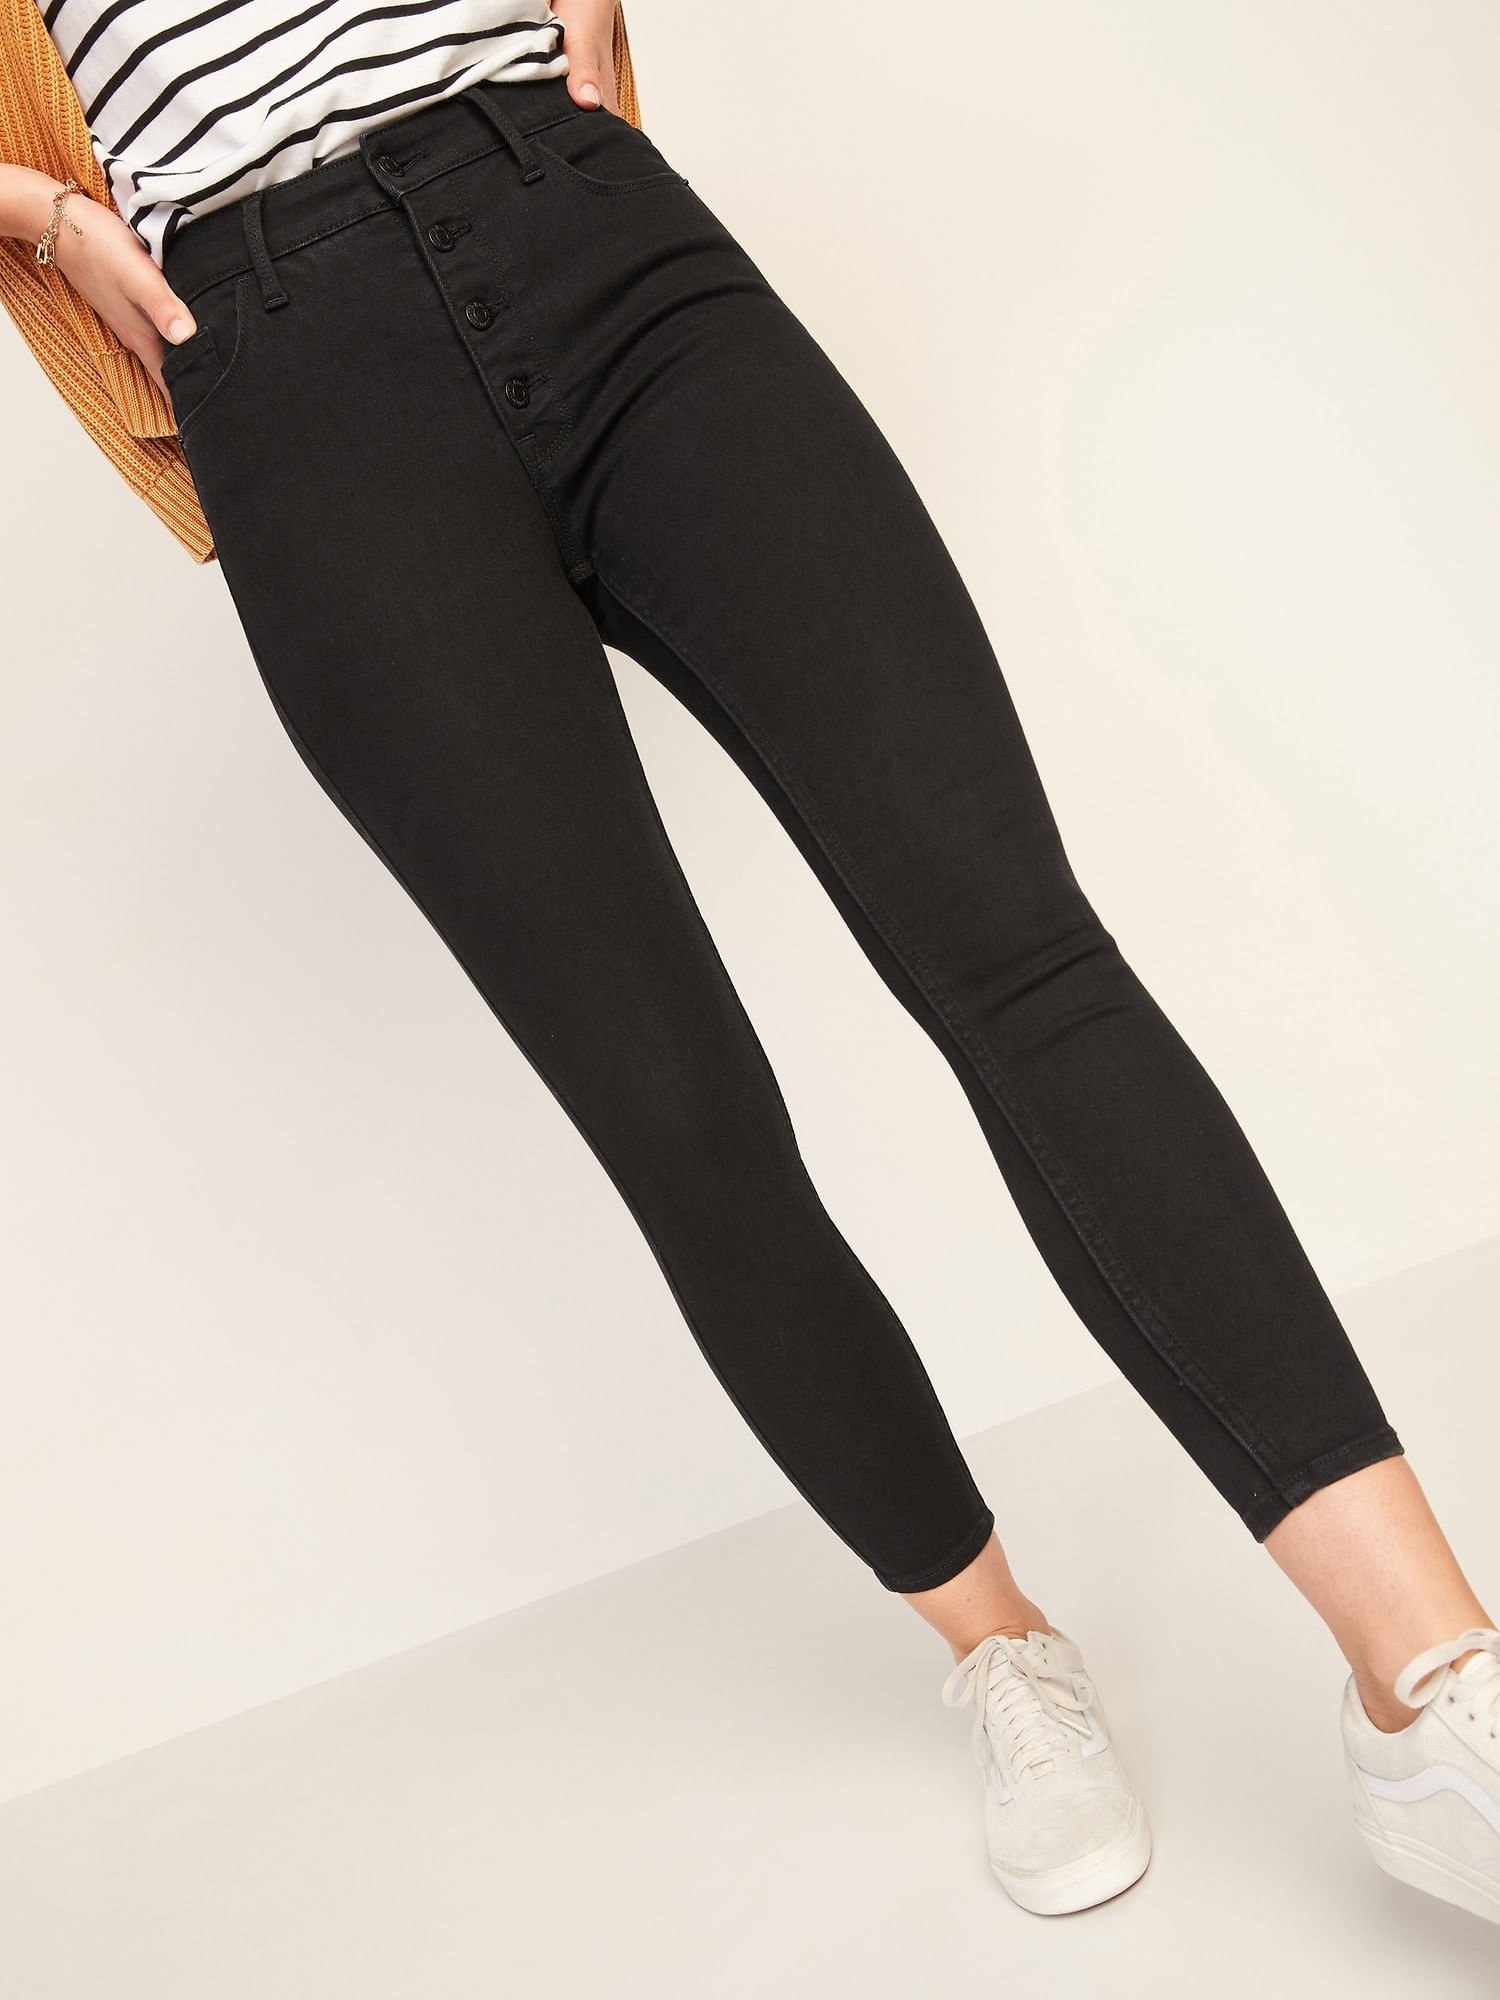 Super Skinny High Jeans - Gris oscuro - MUJER